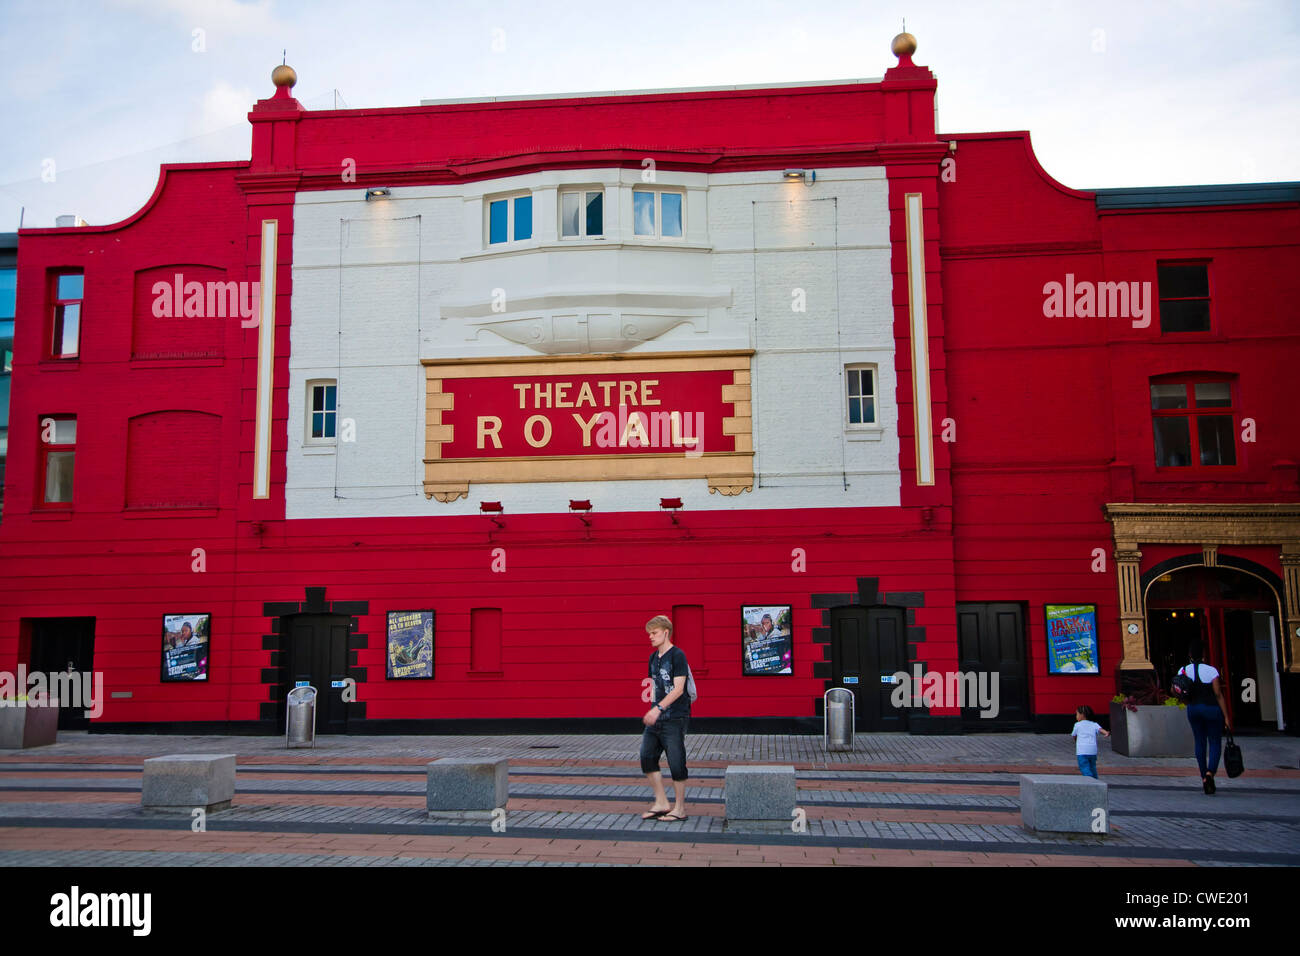 Facade of The Theatre Royal Stratford East, Gerry Raffles Square, Stratford, London, England, United Kingdom Stock Photo